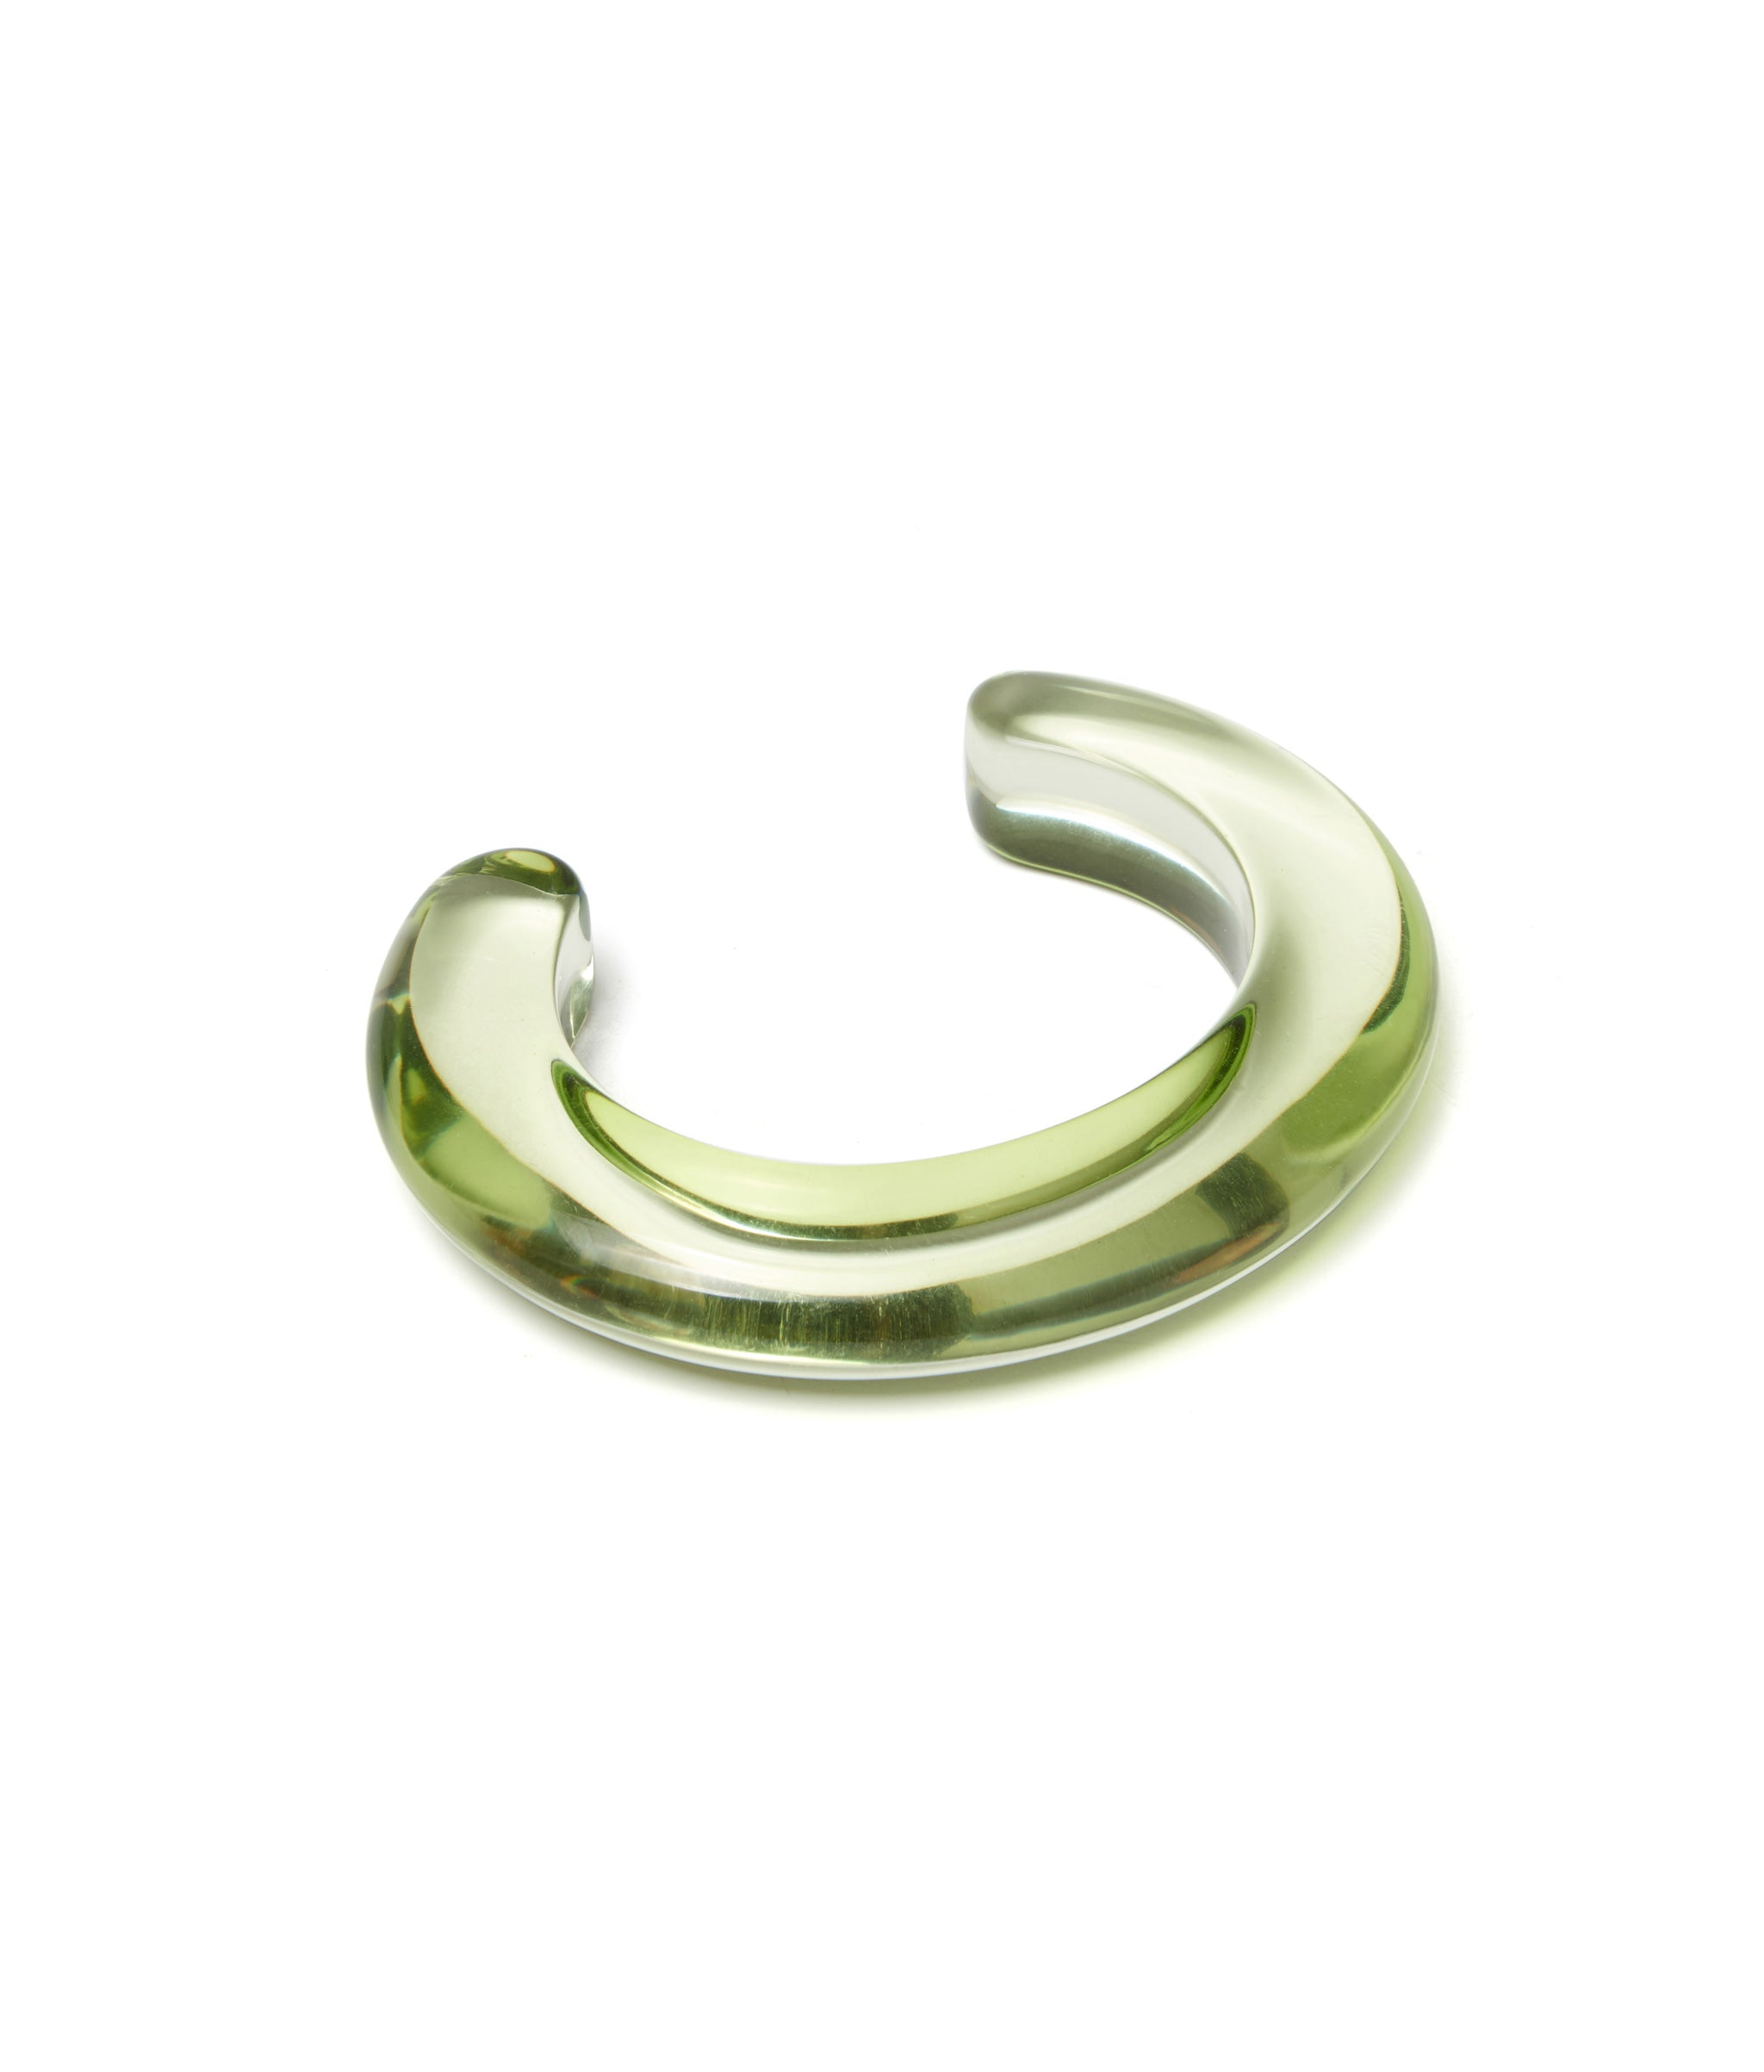 Ridge Cuff in Lime. Light lime-hued resin thin domed cuff bracelet.